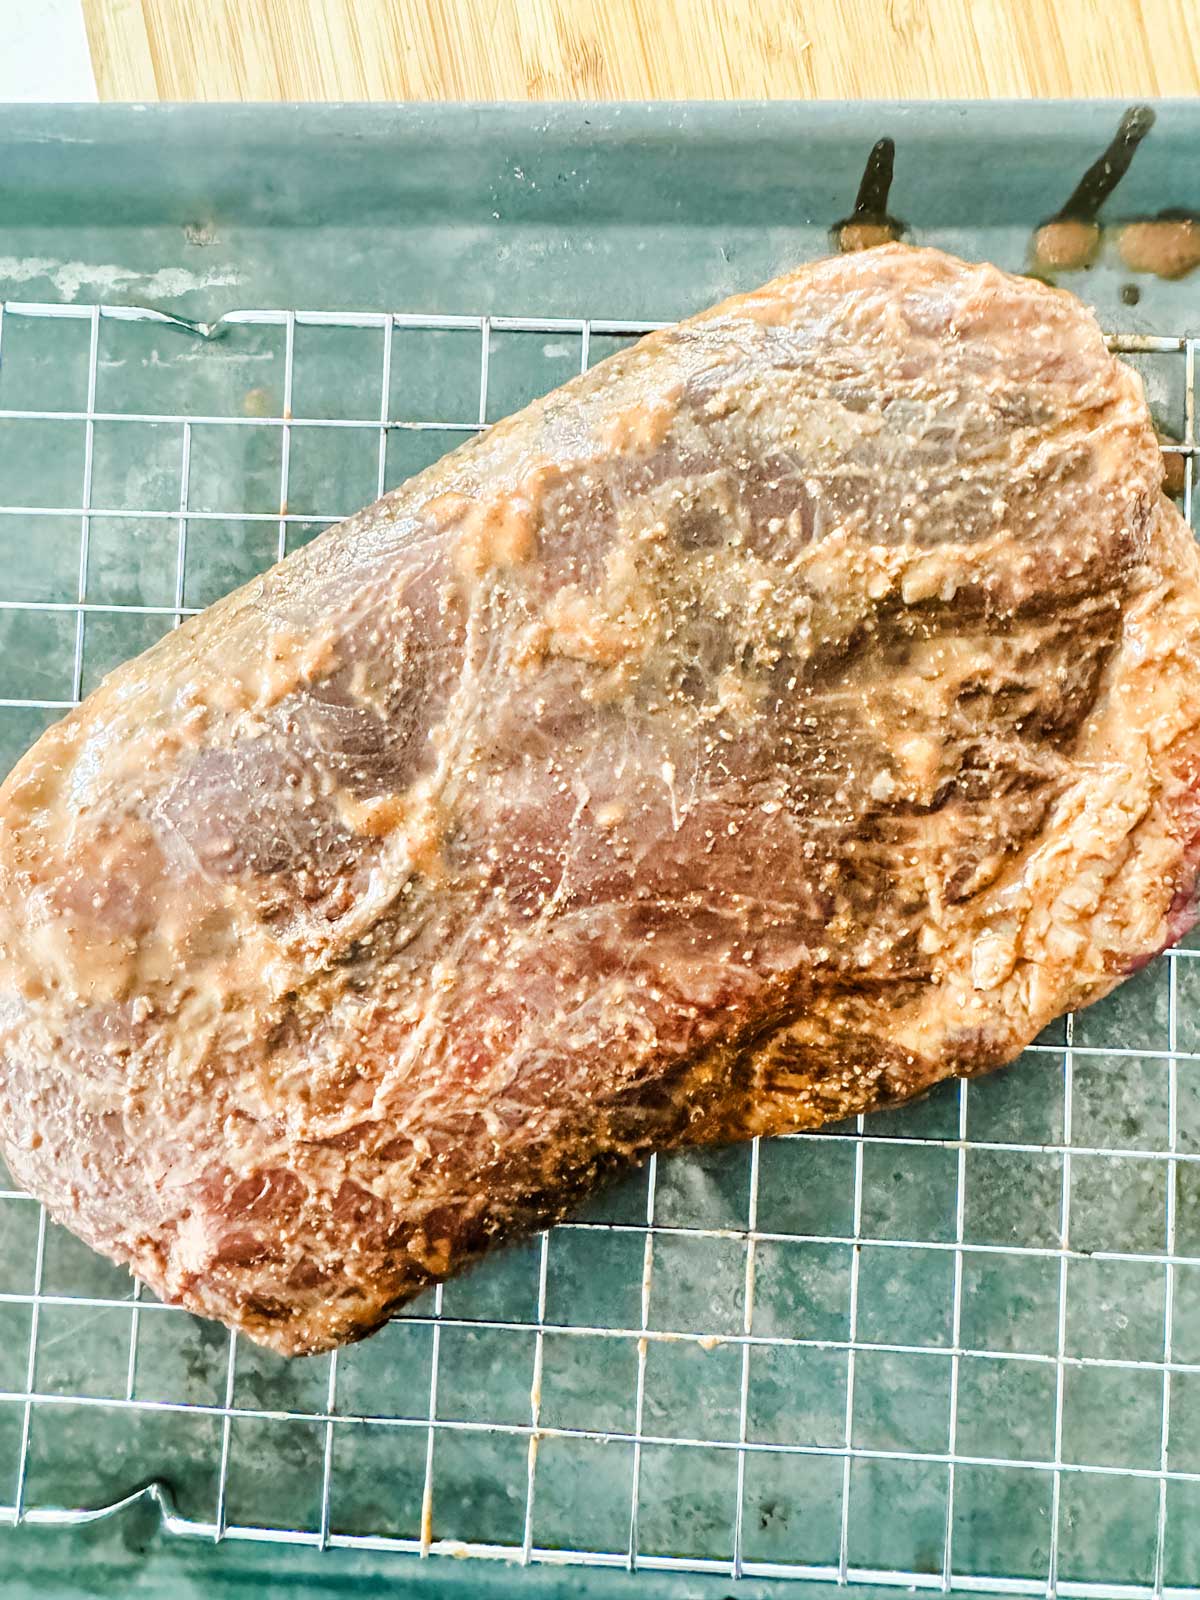 Marinated flank steak ready to cook.